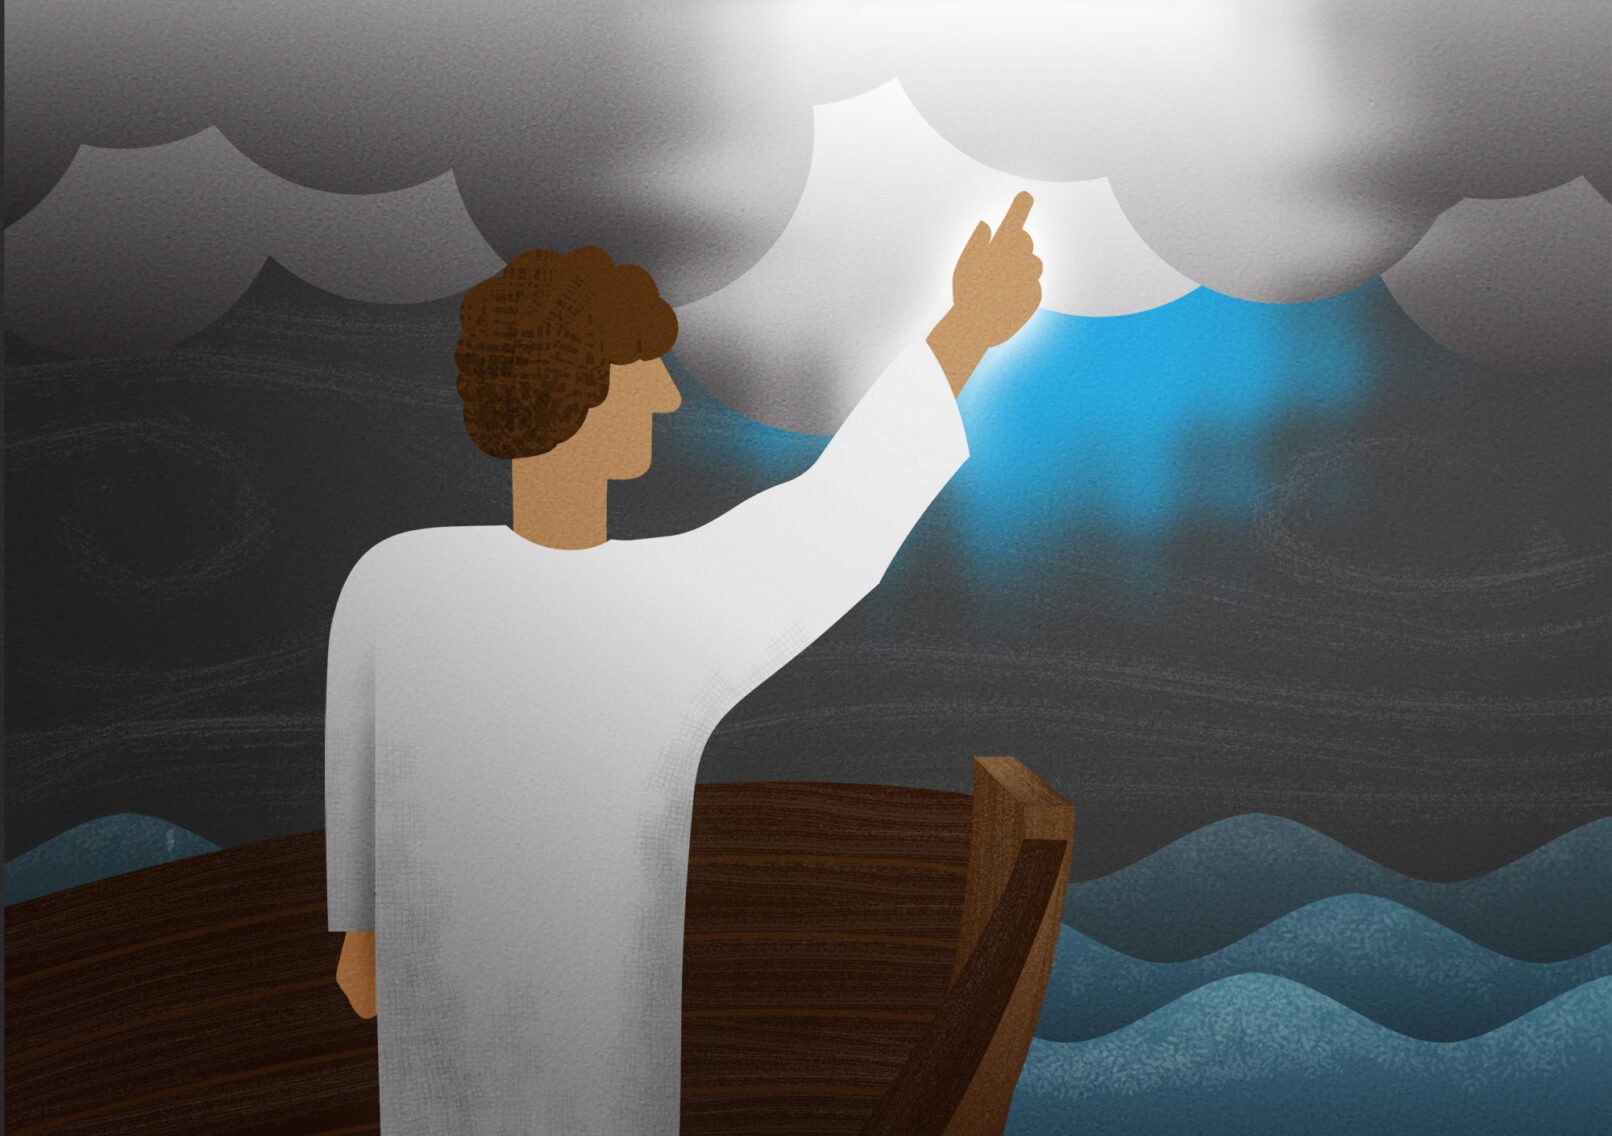 Man in a white robe, standing in a boat, points at storm clouds